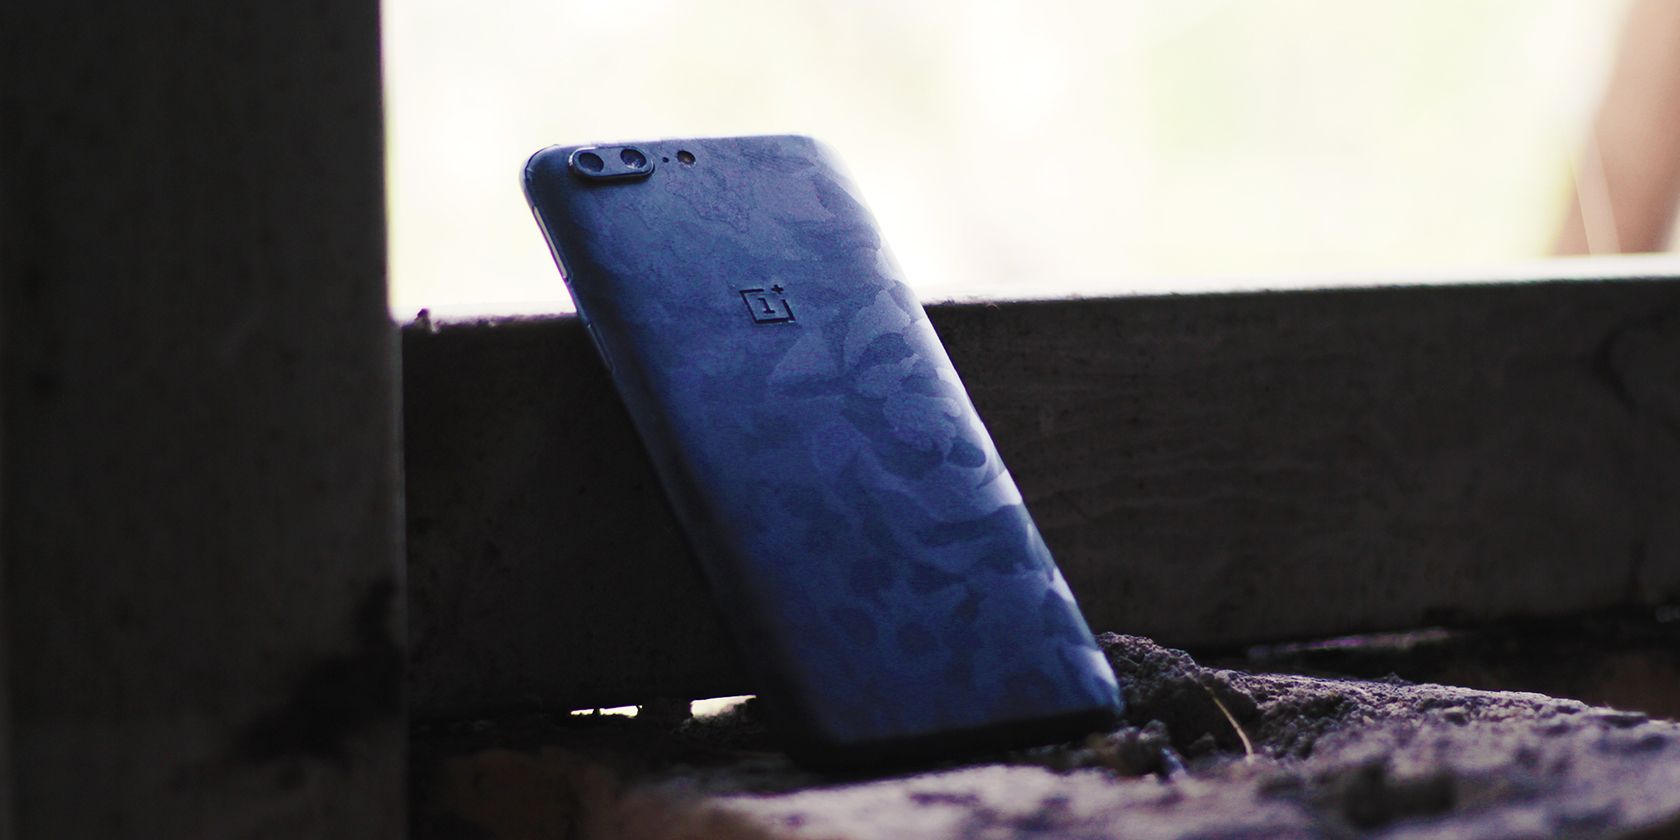 OnePlus phone with a black camouflage skin 